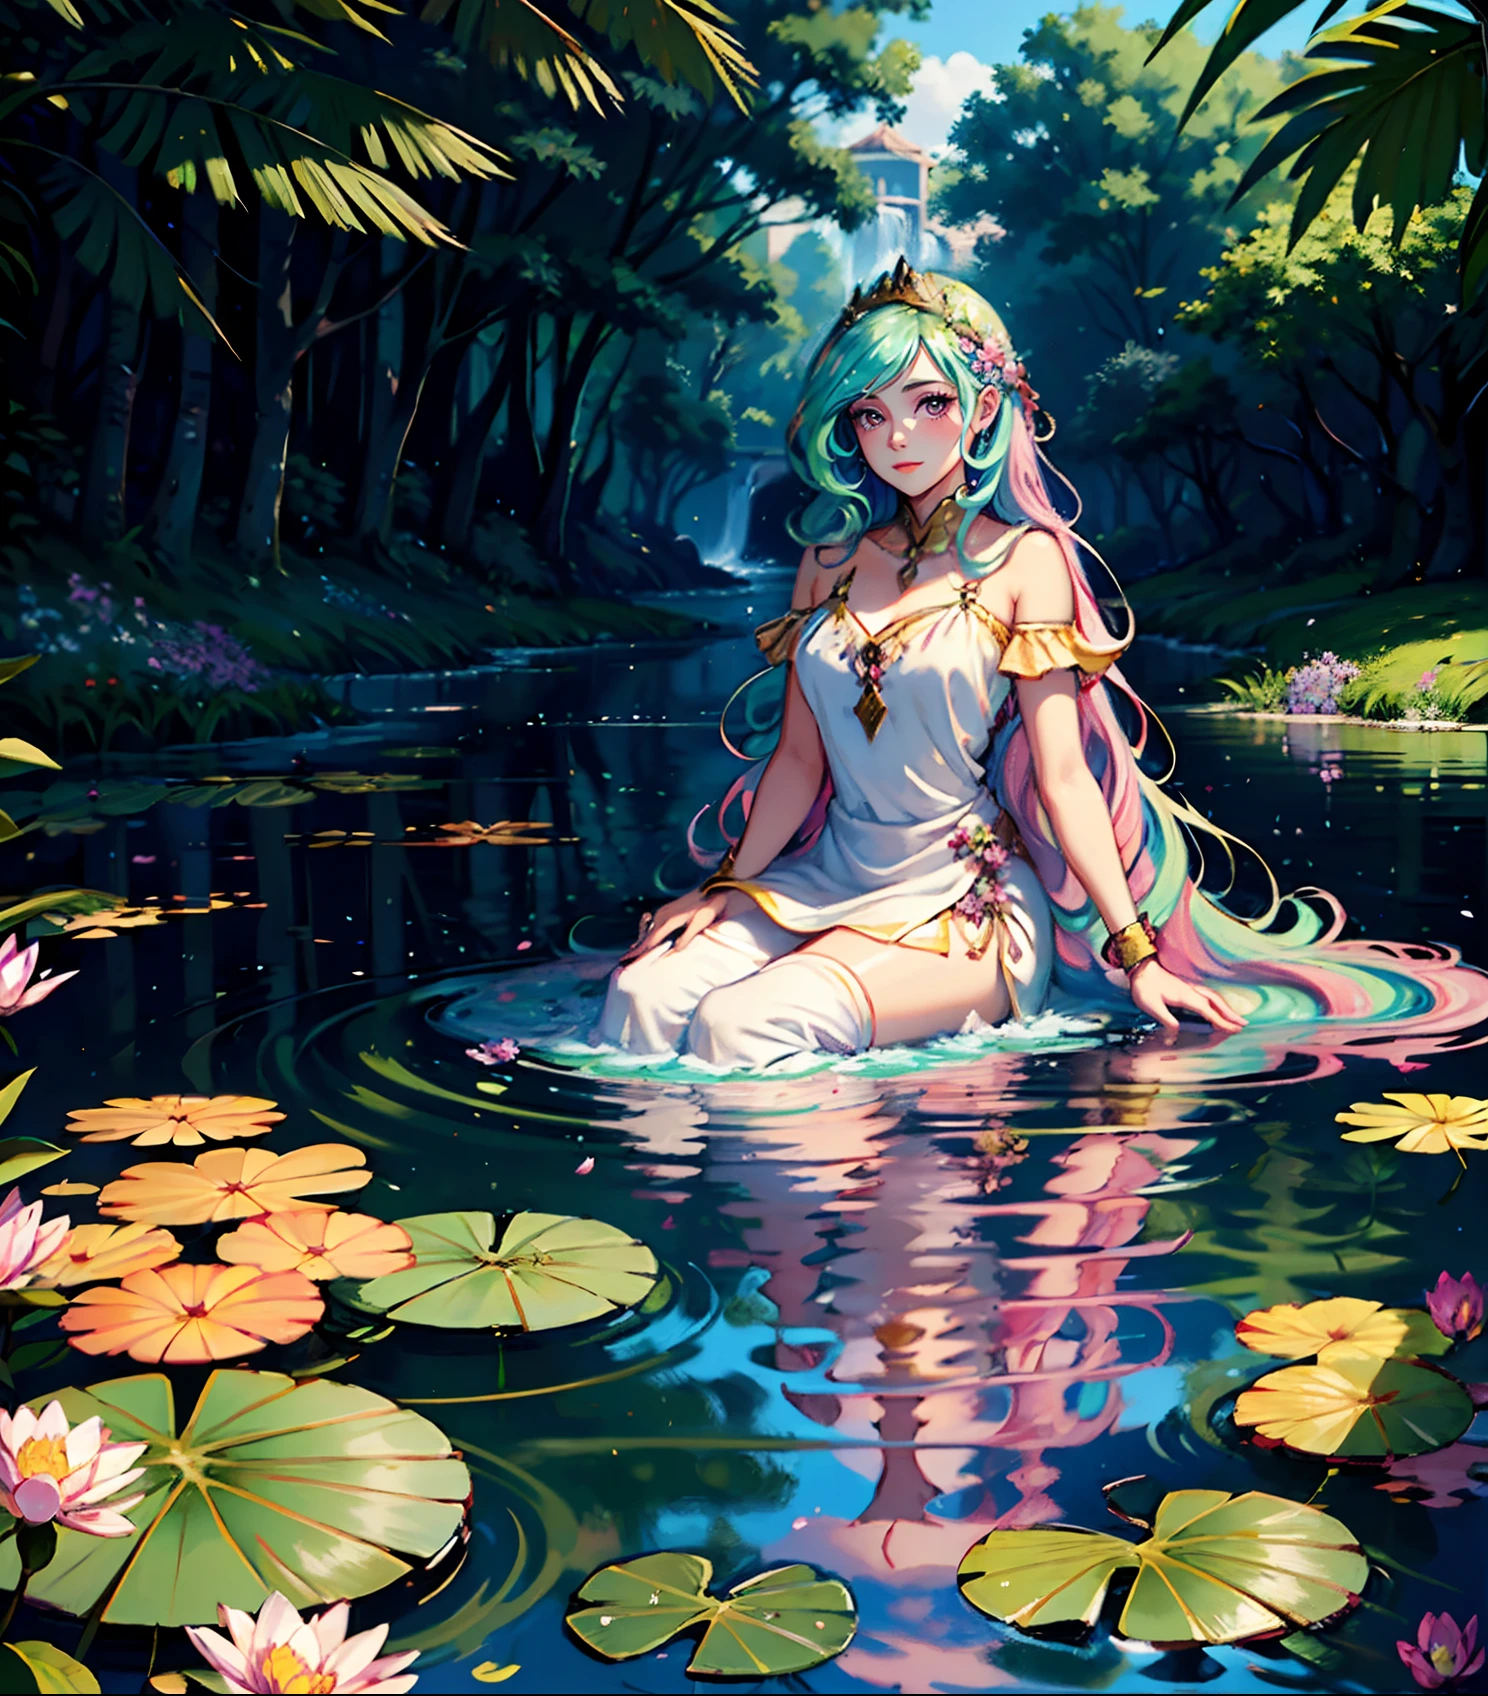 Celestia, celestia from my little pony, celestia in the form of a girl, long wavy hair, pink eyes, lush breast, greek columns, outside, beautiful majestic forest, vine leafs wrapping the columns, bush of flowers everywhere, wearing a white goddess dress, knee high boot, clear sky, bright sunny day, ((water fall)), river, water reflection, lily pads on water, glaring at viewer, sitting under a tree, falling petals